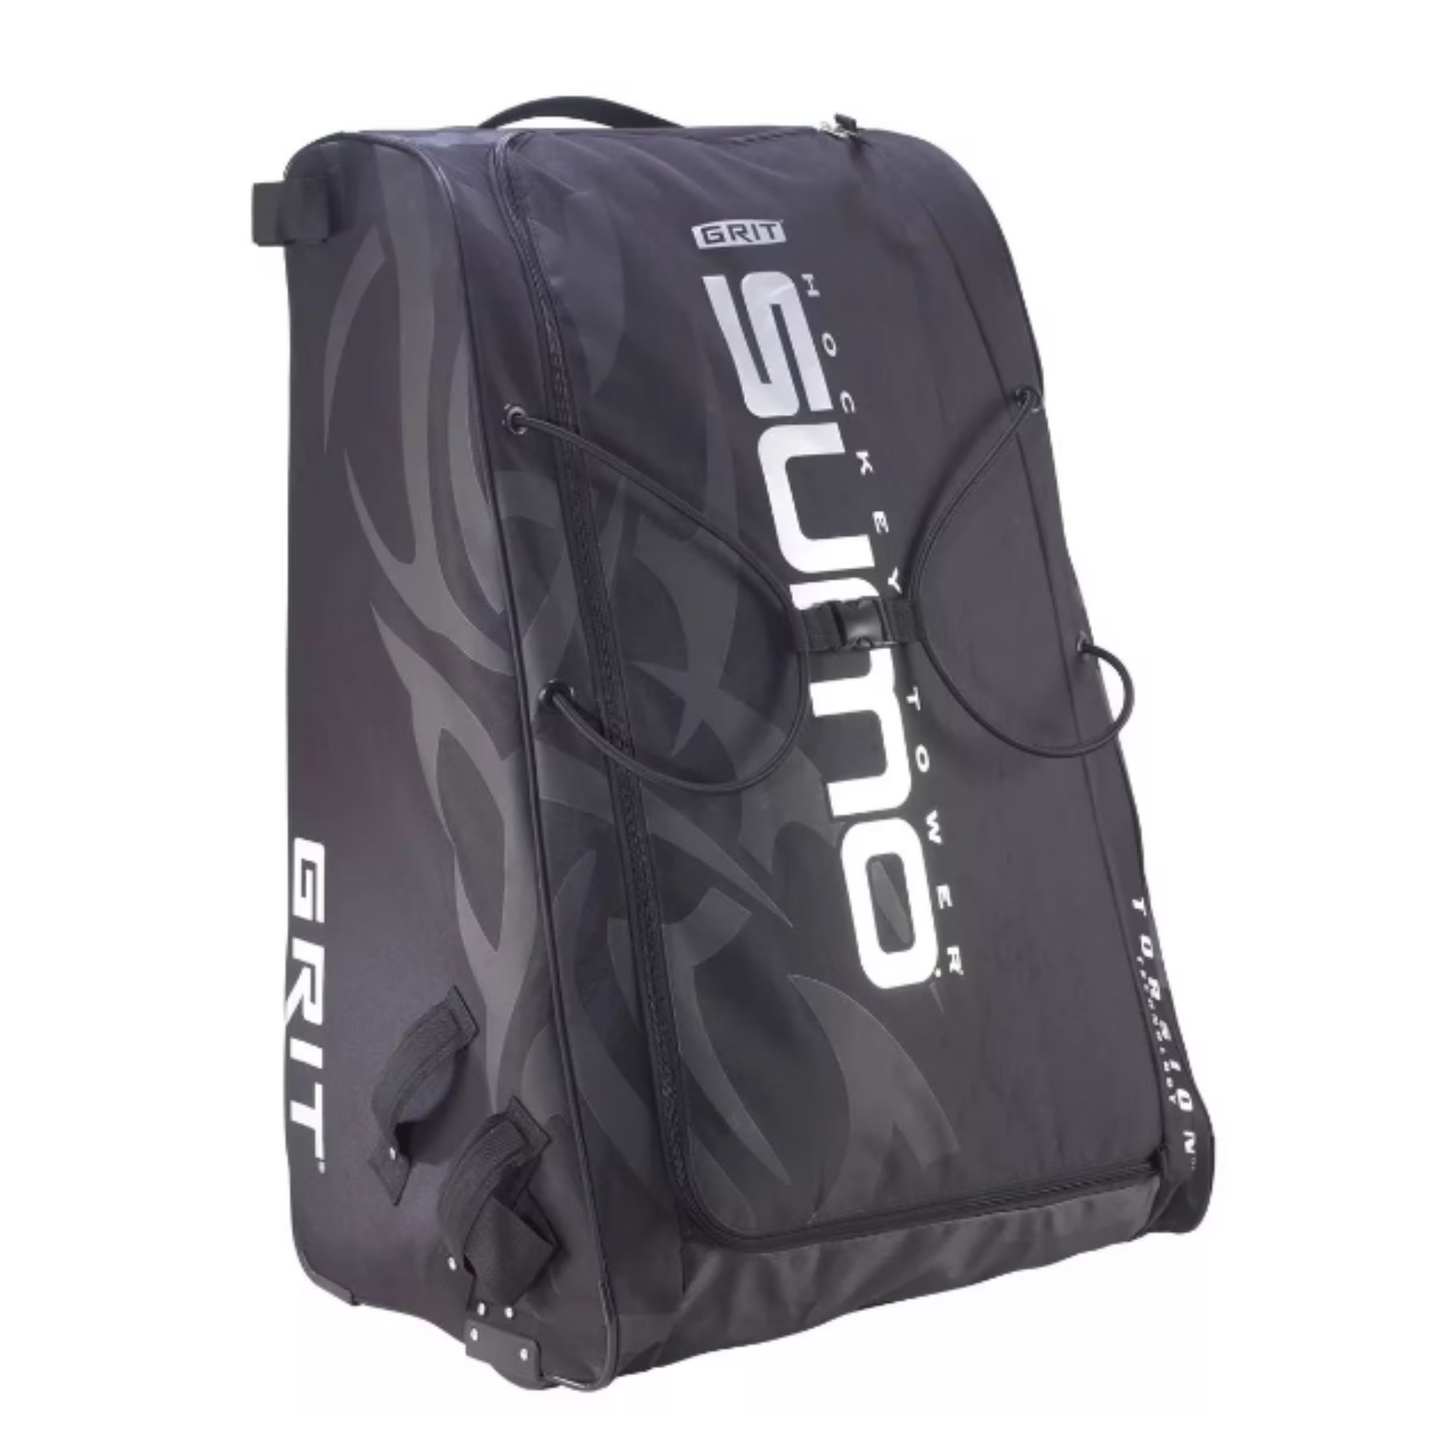 A photo of the GRIT GT4 Sumo Tower Goalie Hockey Bag 40" in colour black angled front view.